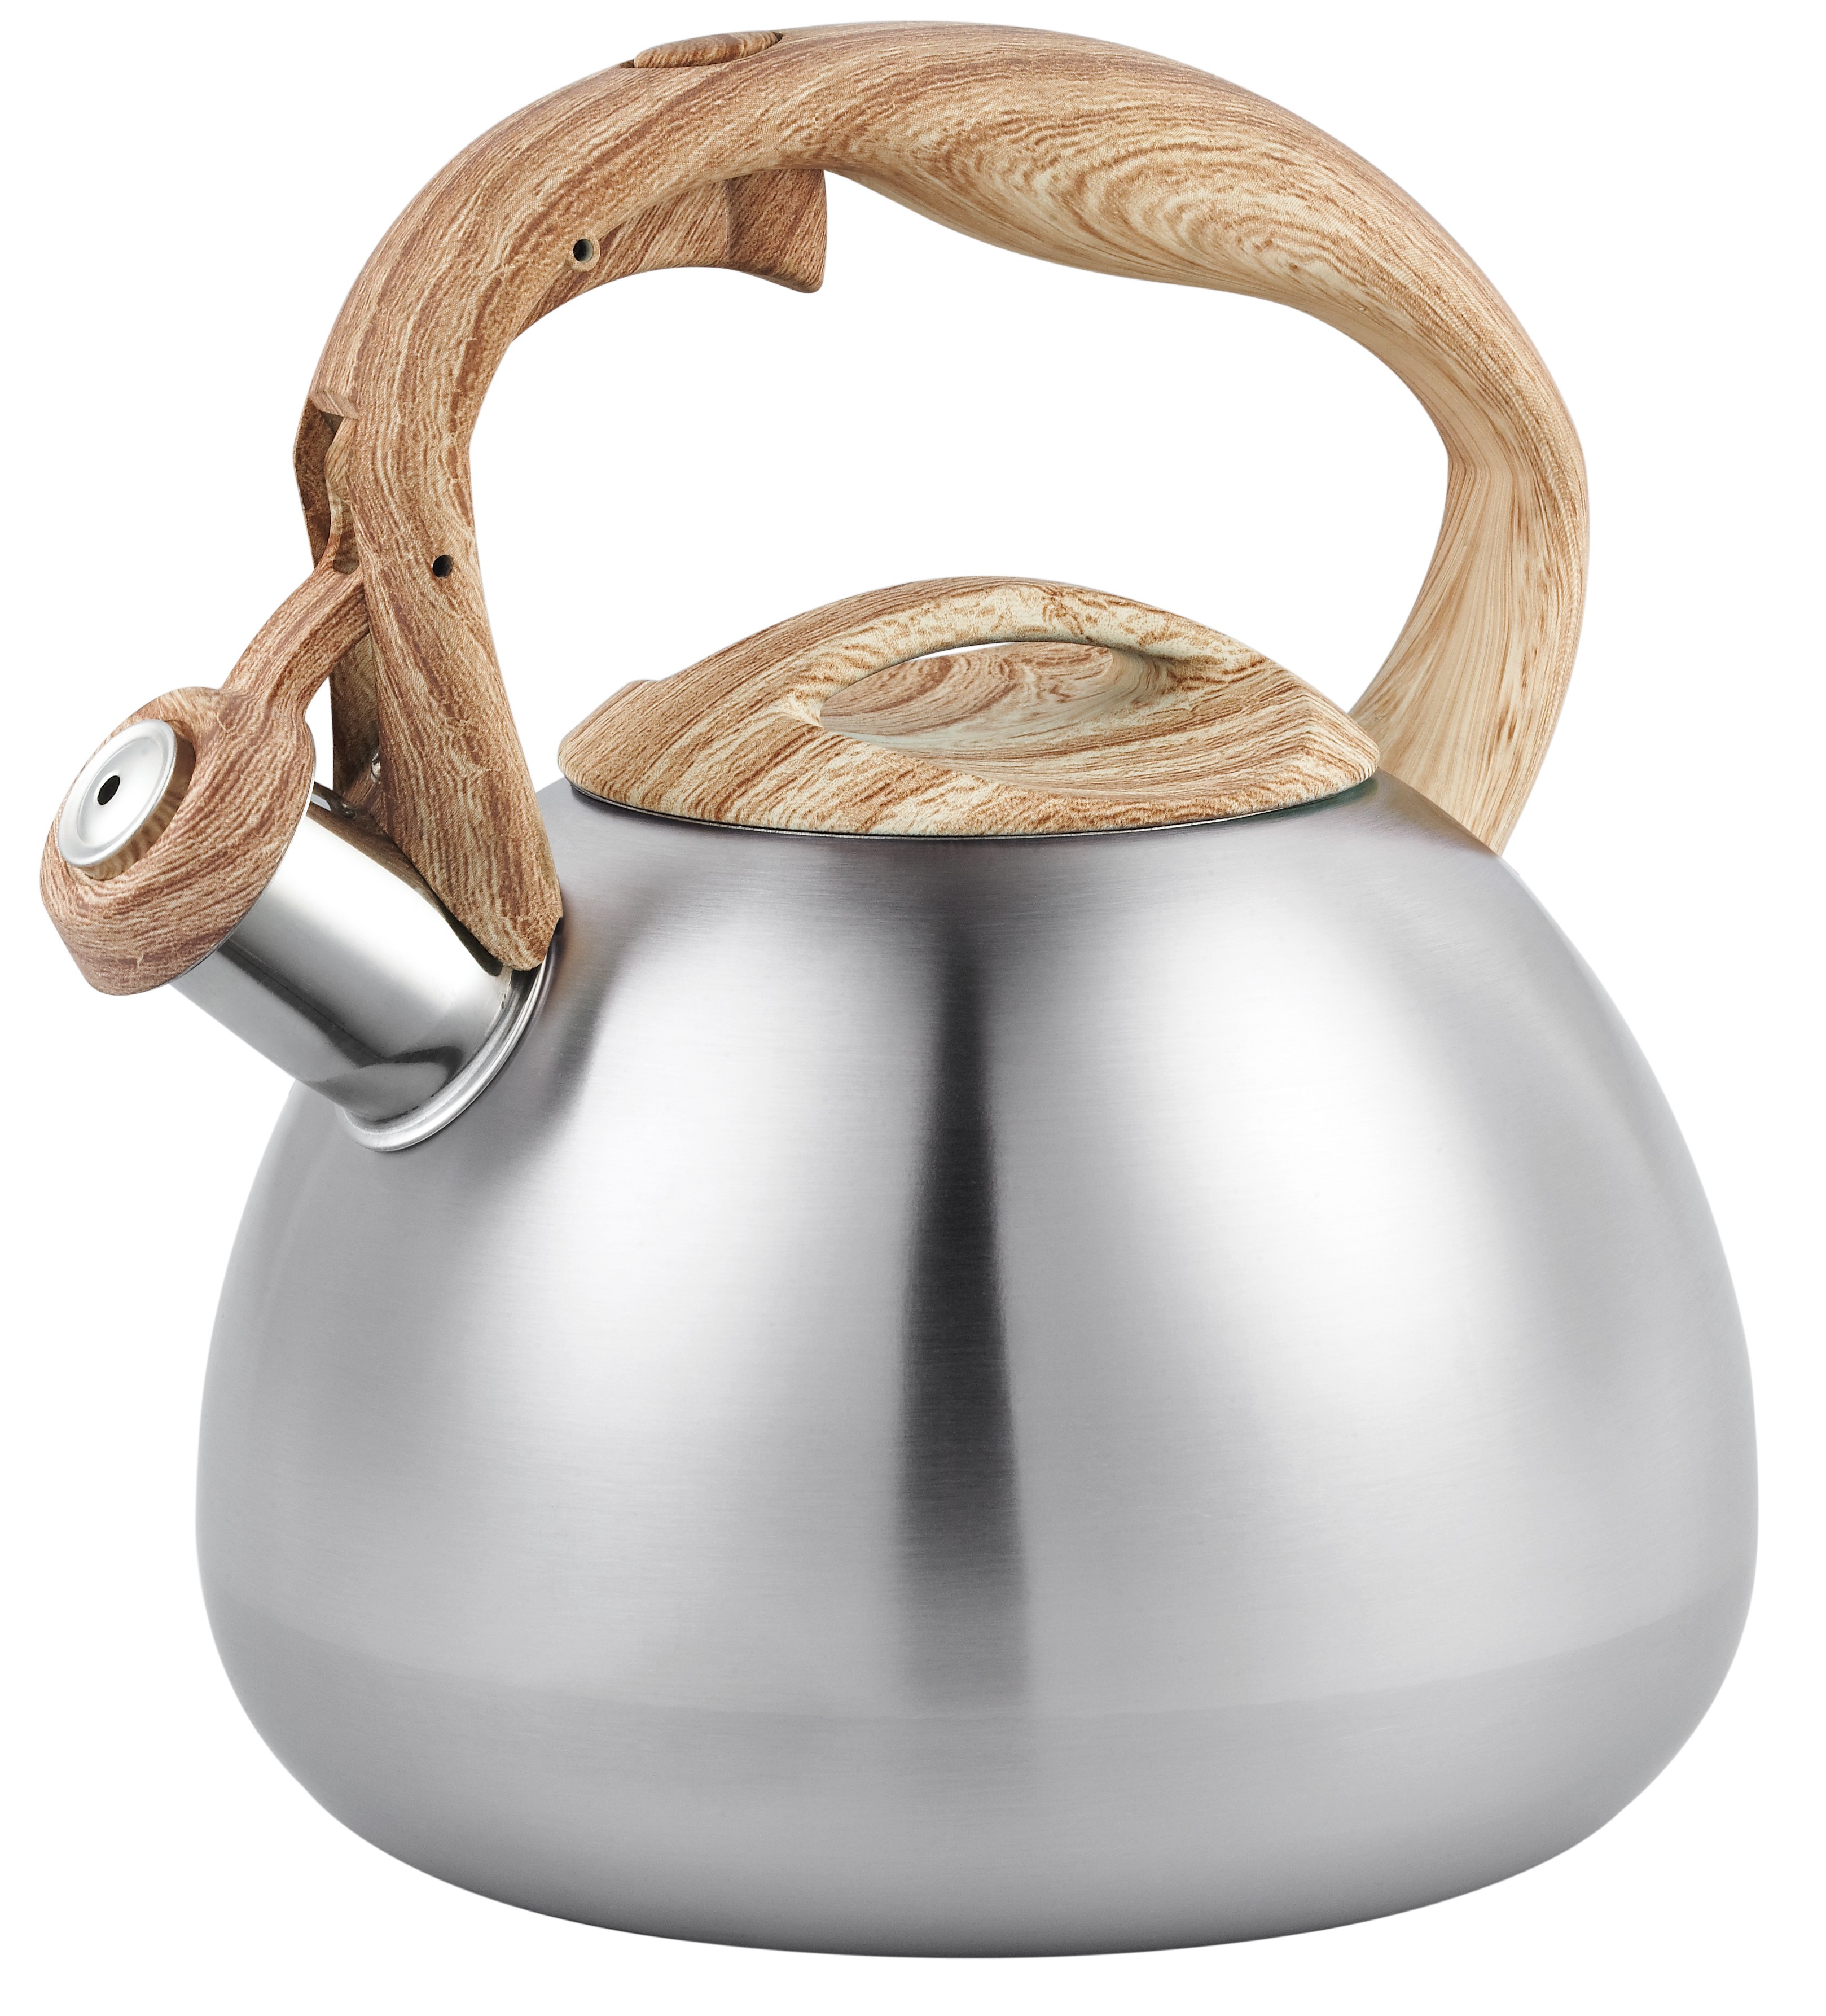 Stainless Steel Whistle for Kettle Coffee Whistle for Kettle Whistling Kettle